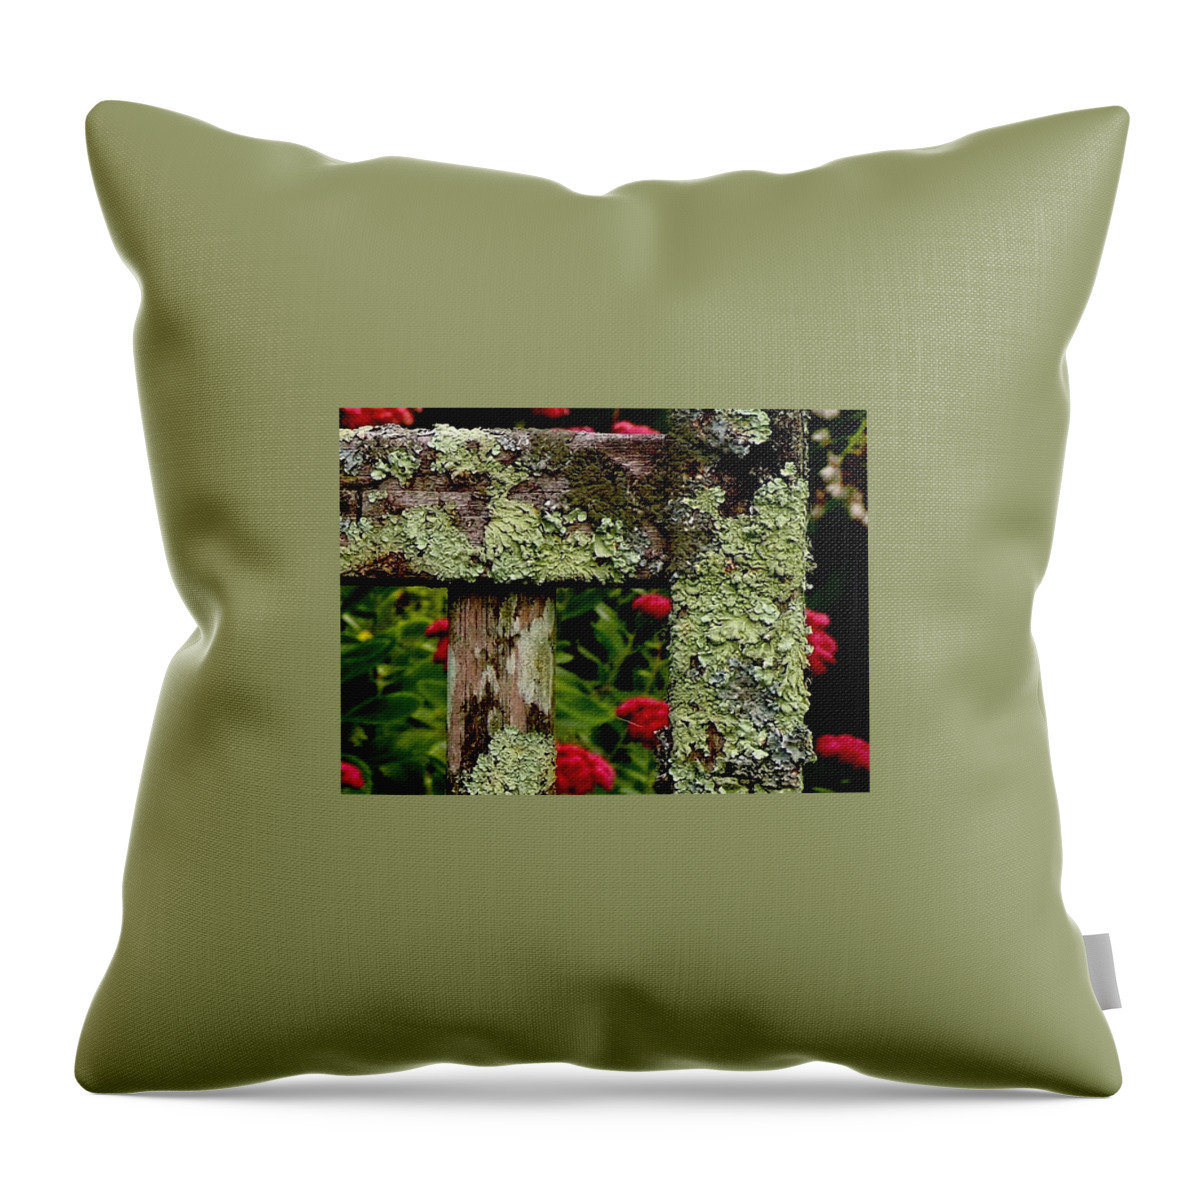 Lichen Throw Pillow featuring the photograph Keeping Company With Lichen by Alida M Haslett